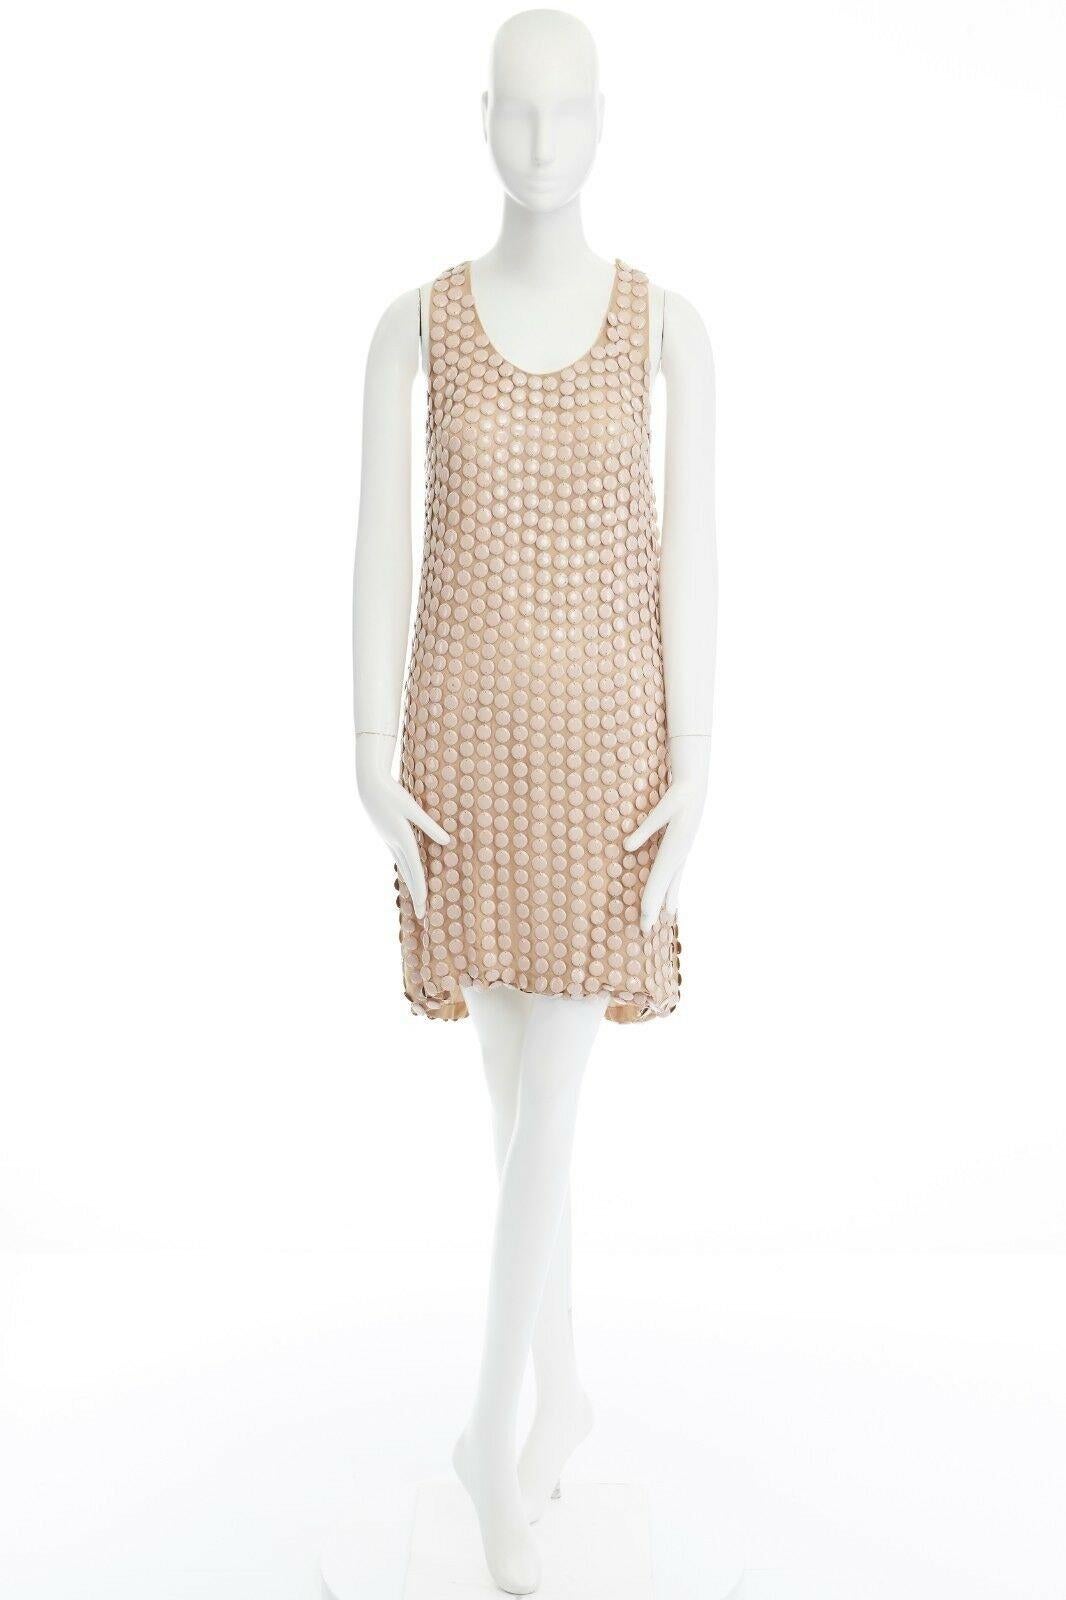 STELLA MCCARTNEY 2005 pink metal paillettes racer back mini dress IT42 M 
Reference: CC/AECG00032 
Brand: Stella McCartney 
Designer: Stella McCartney 
Collection: AD2005 
Material: Silk 
Color: Cream 
Pattern: Other 
Extra Detail: Peach dress. 100%